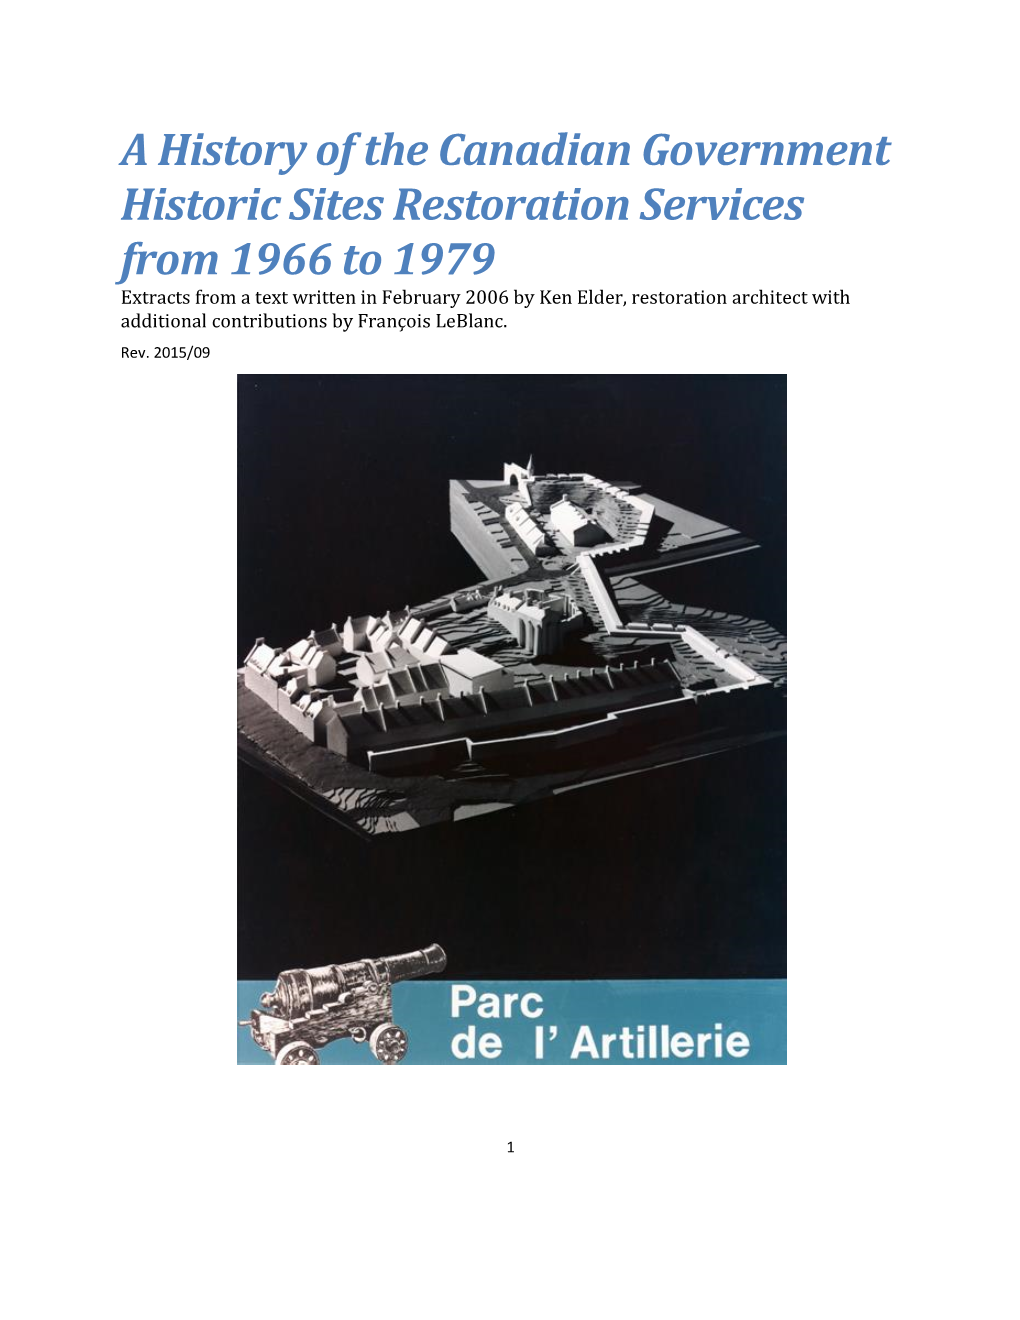 A History of the Canadian Government Historic Sites Restoration Services from 1966 to 1979